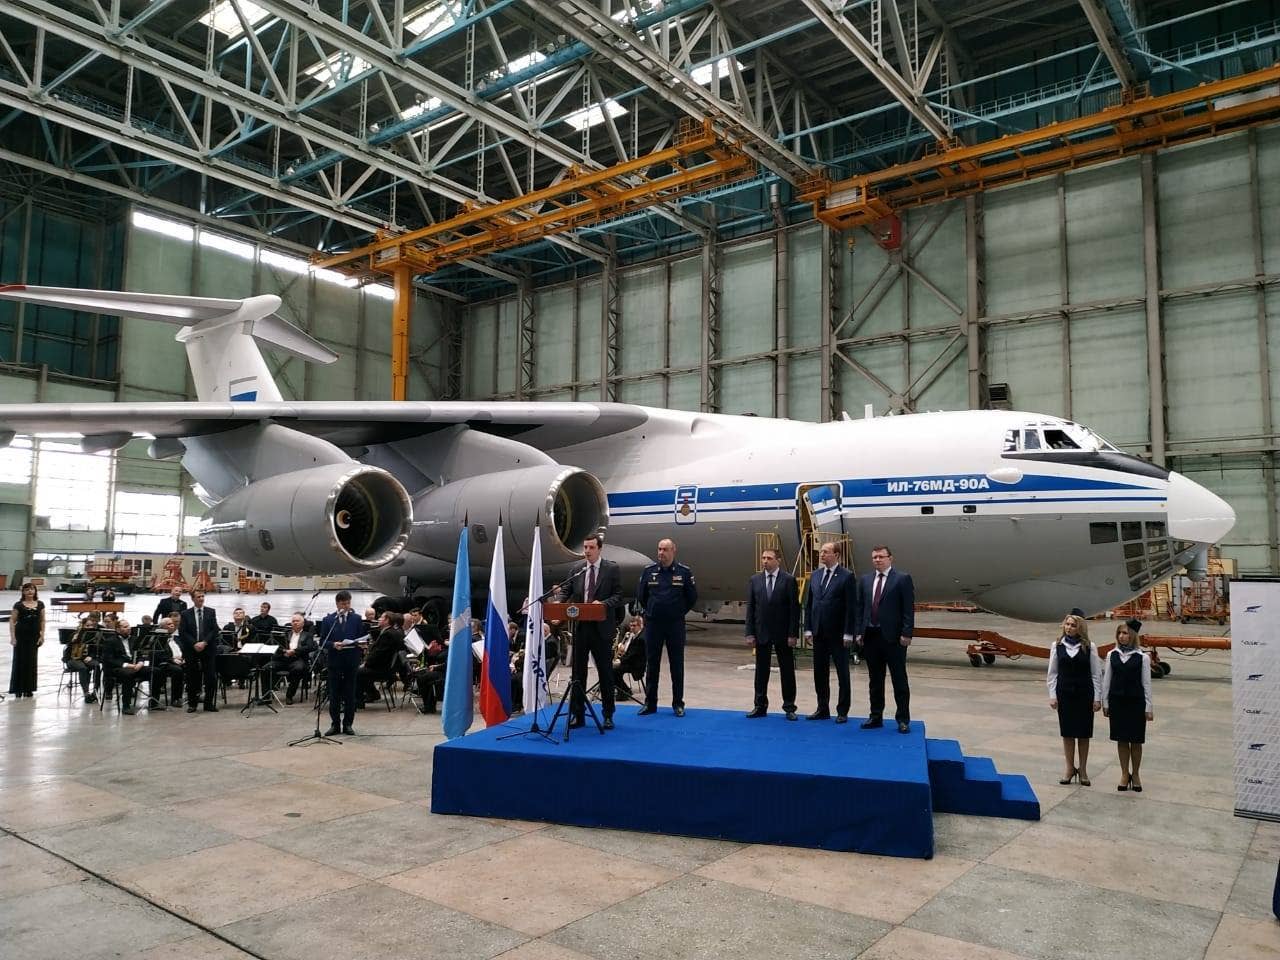 The Russian Ministry of Defense contracted Il-76MD-90A transports at a cost of 3,570 million rubles each, which turned out to be well below the producer’s own costs. Pictured is the delivery of an Il-76MD-90A in Ulyanovsk in April 2019. <em>United Aircraft Corporation</em>